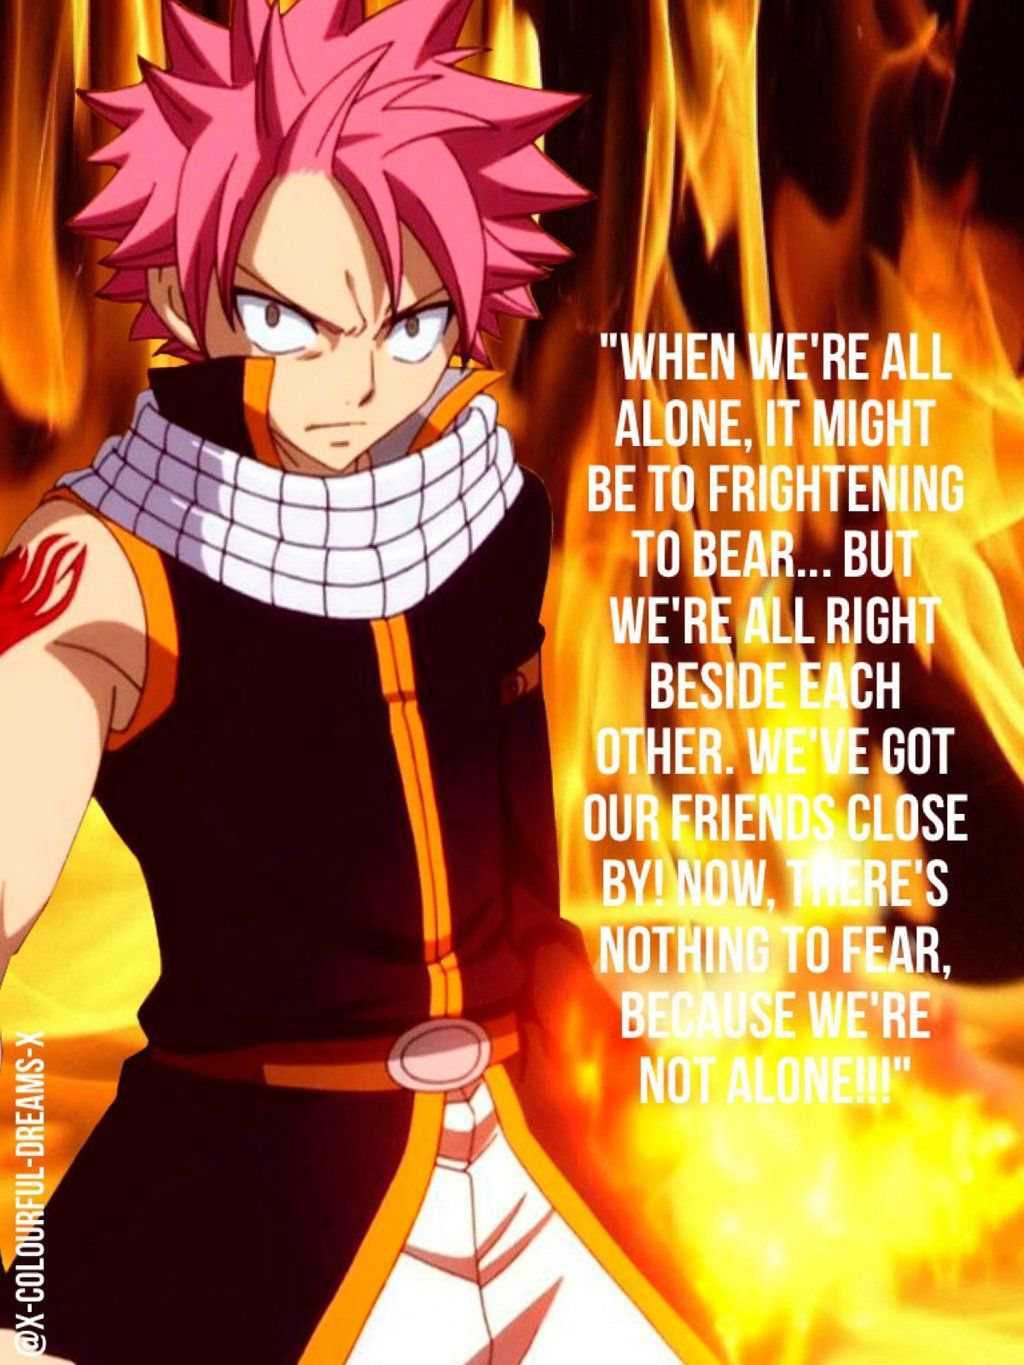 Natsu Dragneel - Fairy Tail wallpaper - Anime wallpapers - #26497